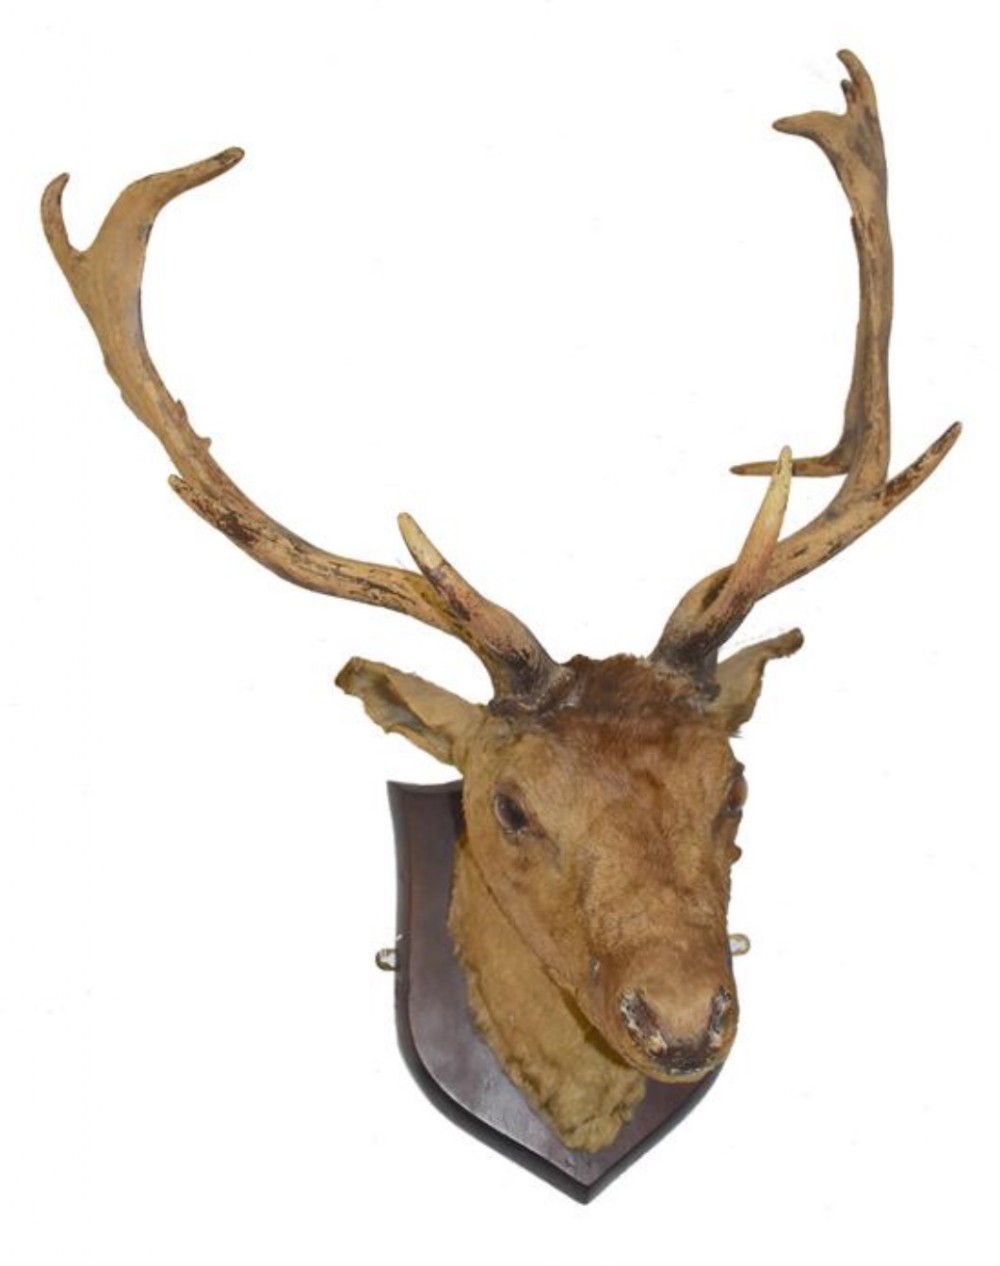 c19th mounted red deer taxidermy head and antlers